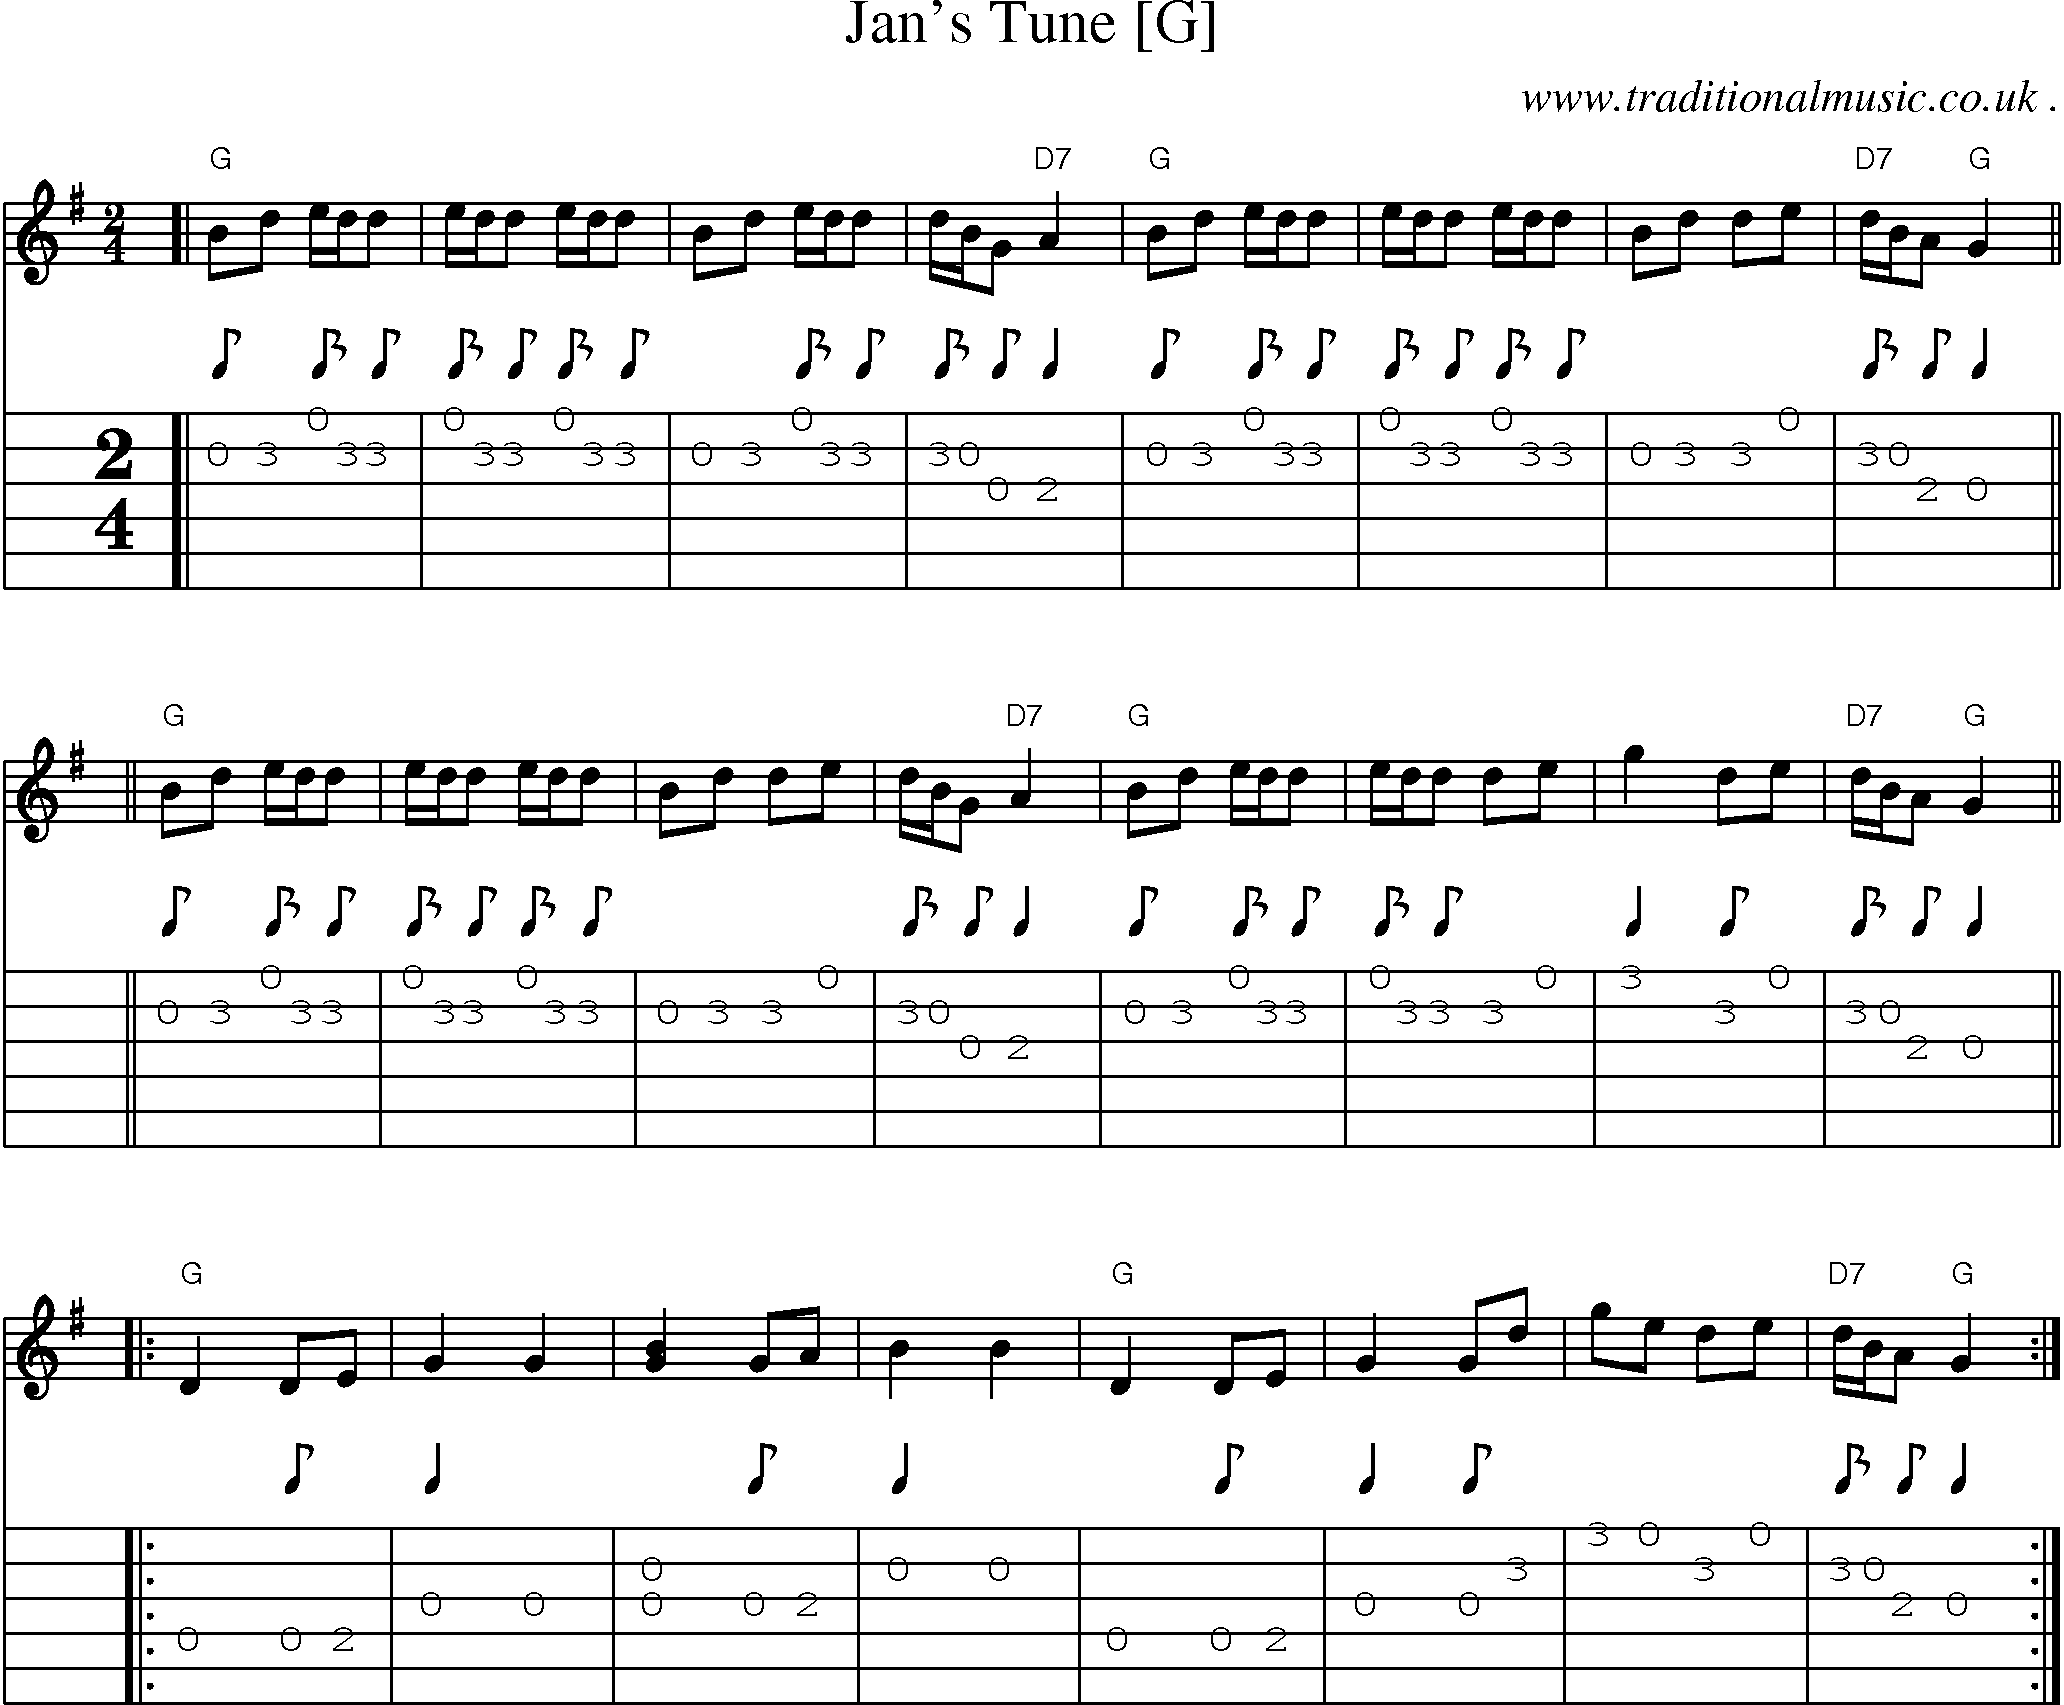 Music Score and Guitar Tabs for Jans Tune [g]